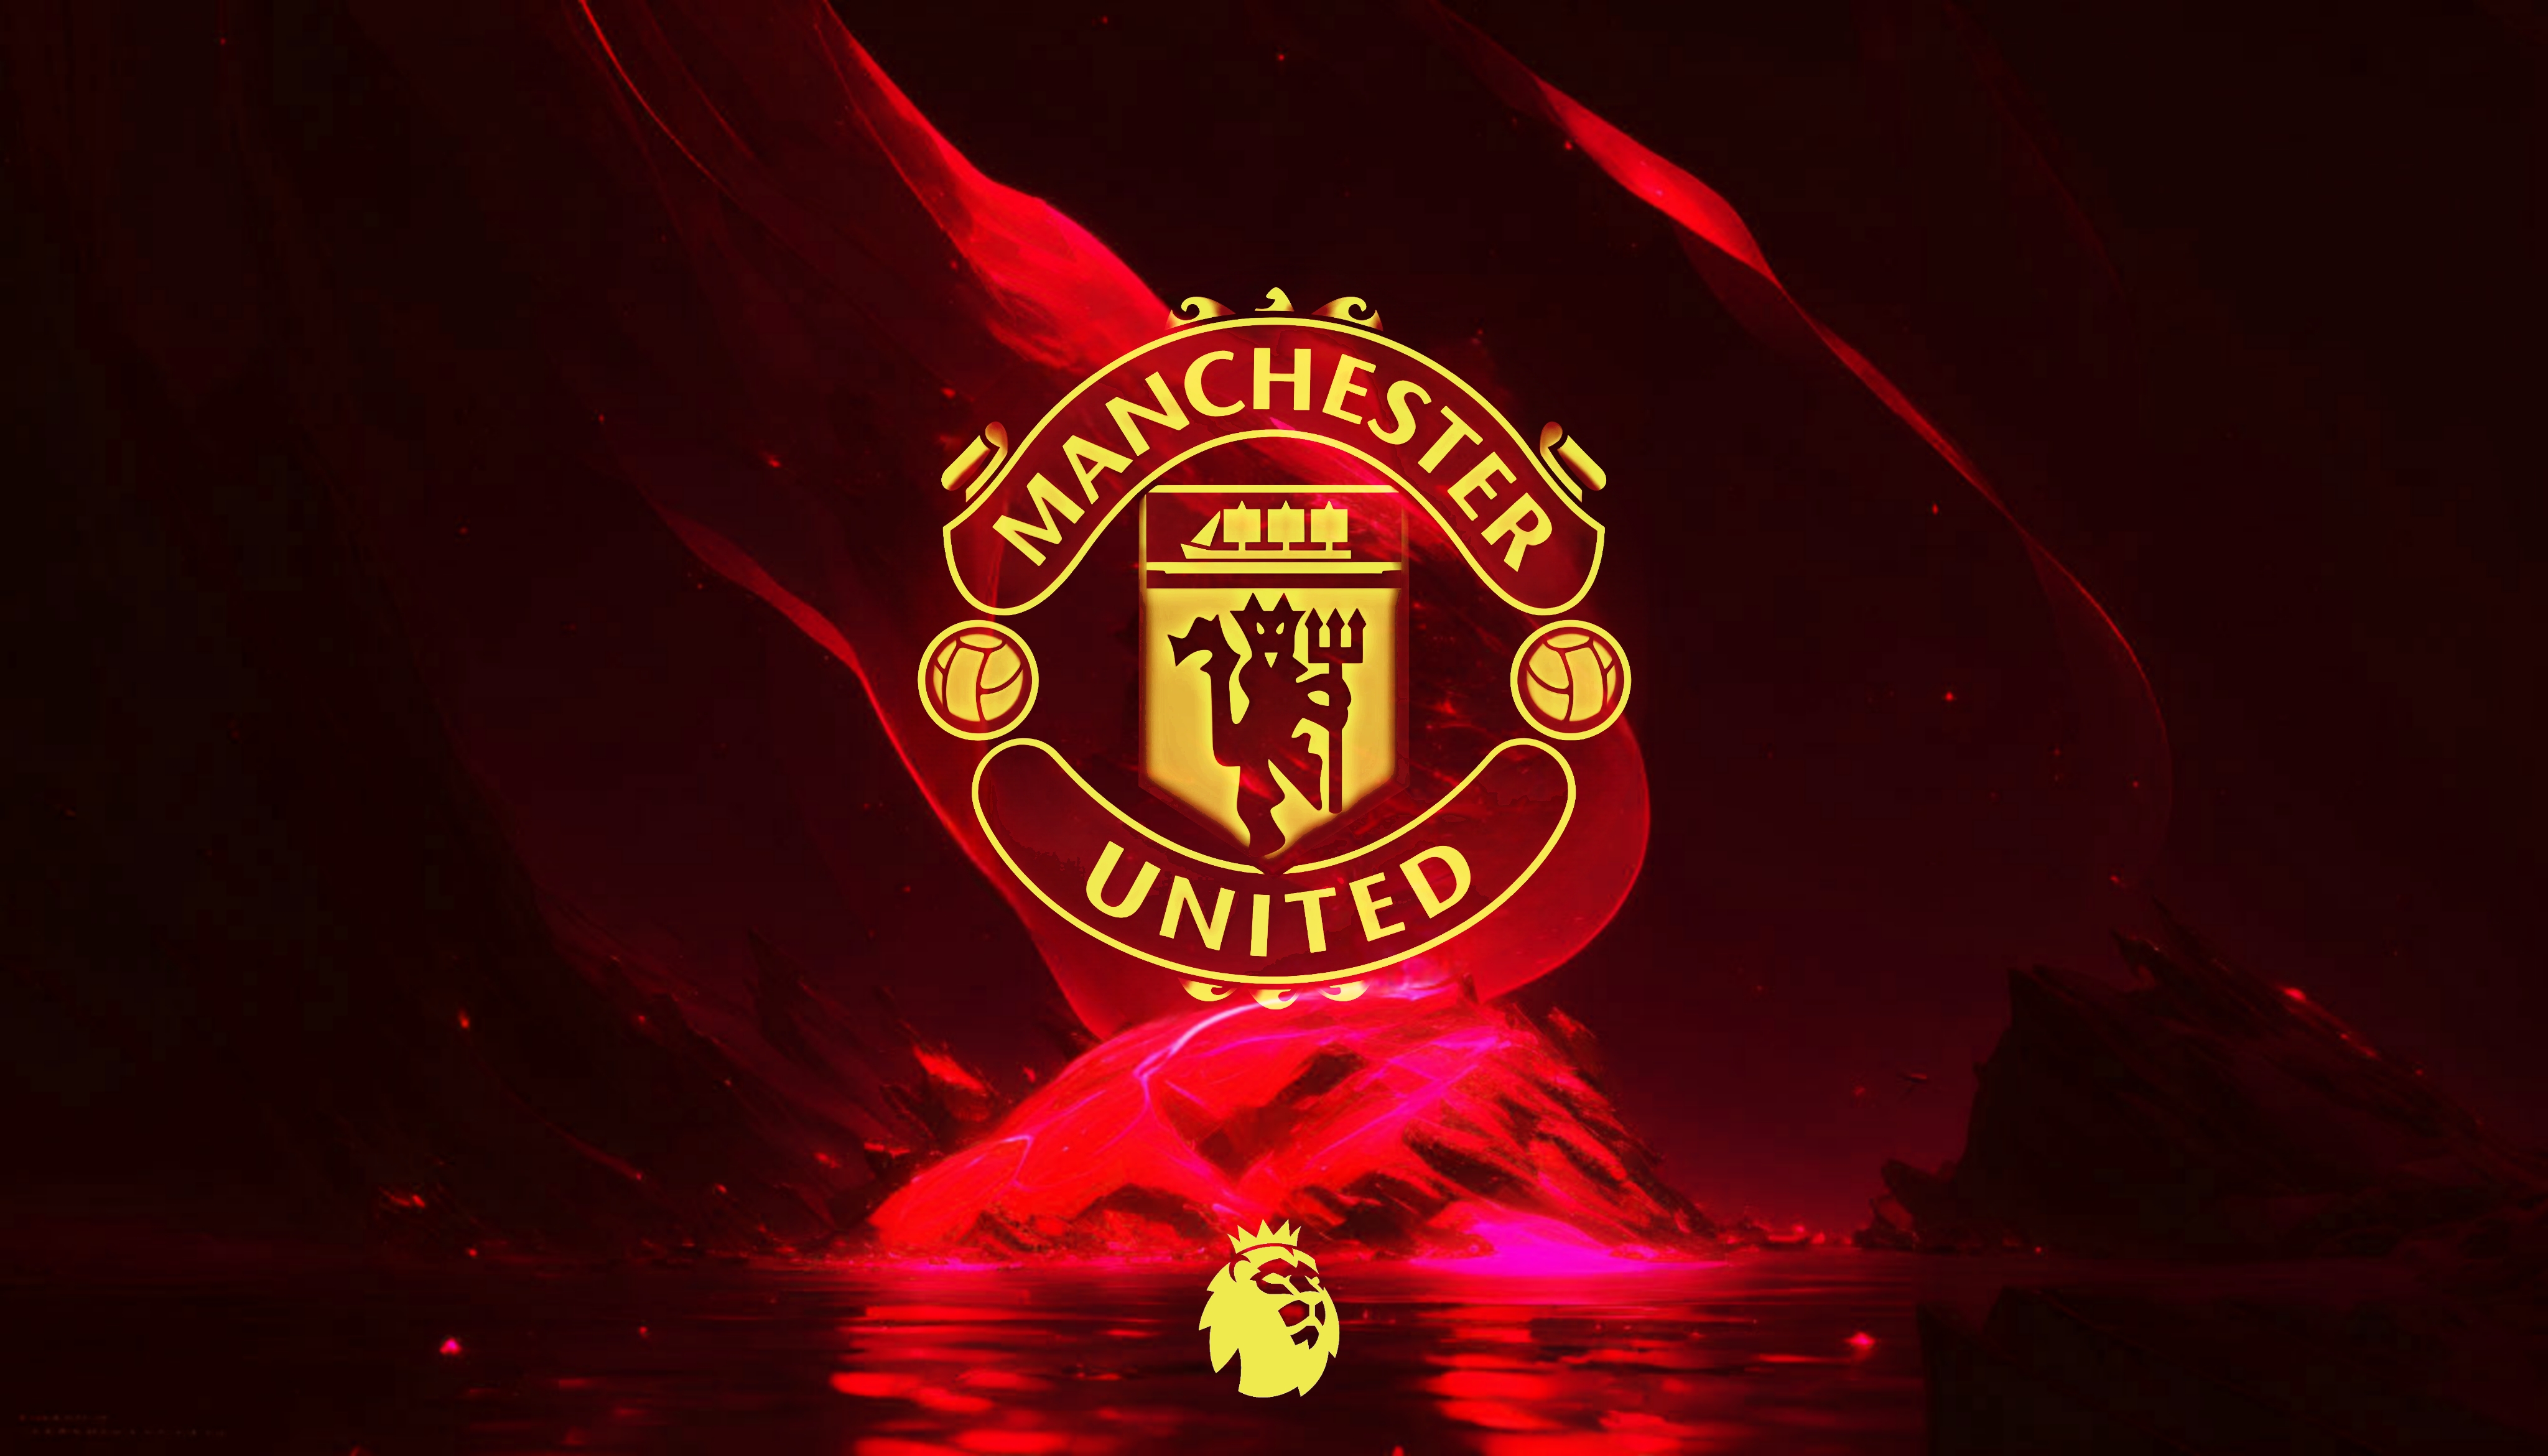 MANCHESTER UNITED 